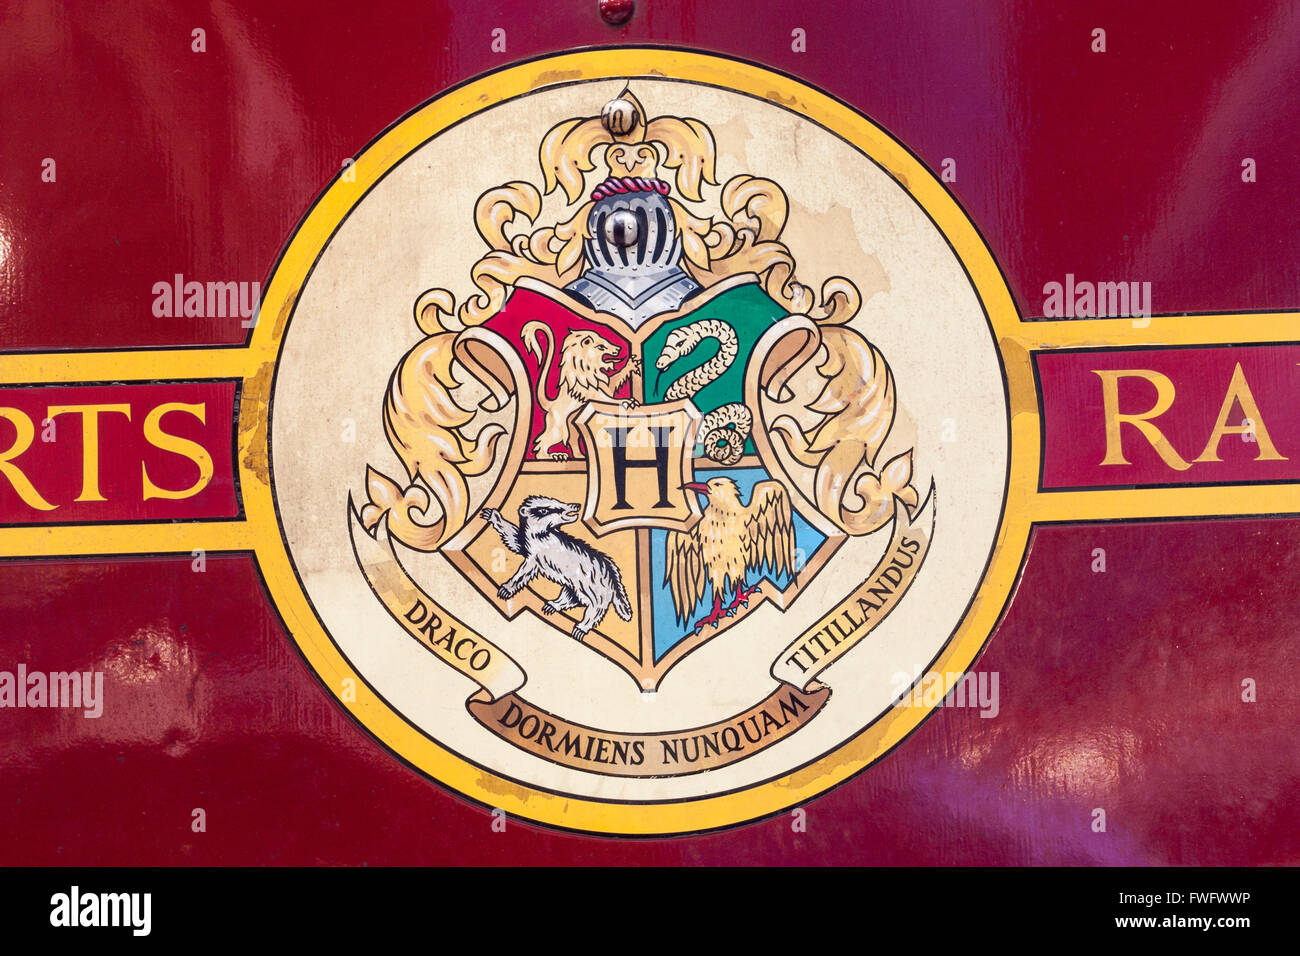 Hogwarts Latin motto on Hogwarts Express, the train used in Harry Potter films. Stock Photo